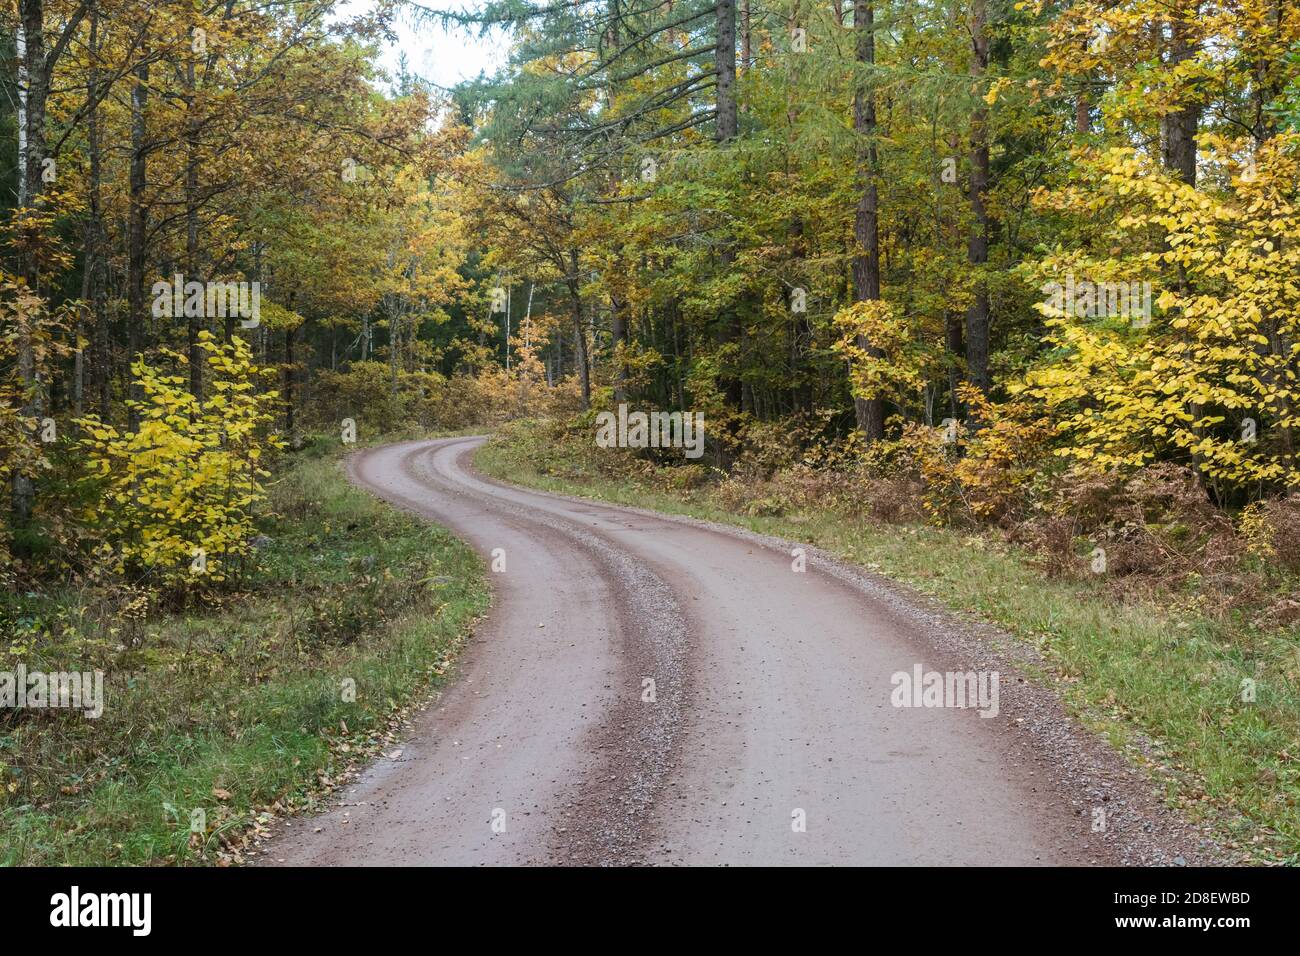 Curved gravel road in a fall colored forest in Smaland, Sweden Stock Photo